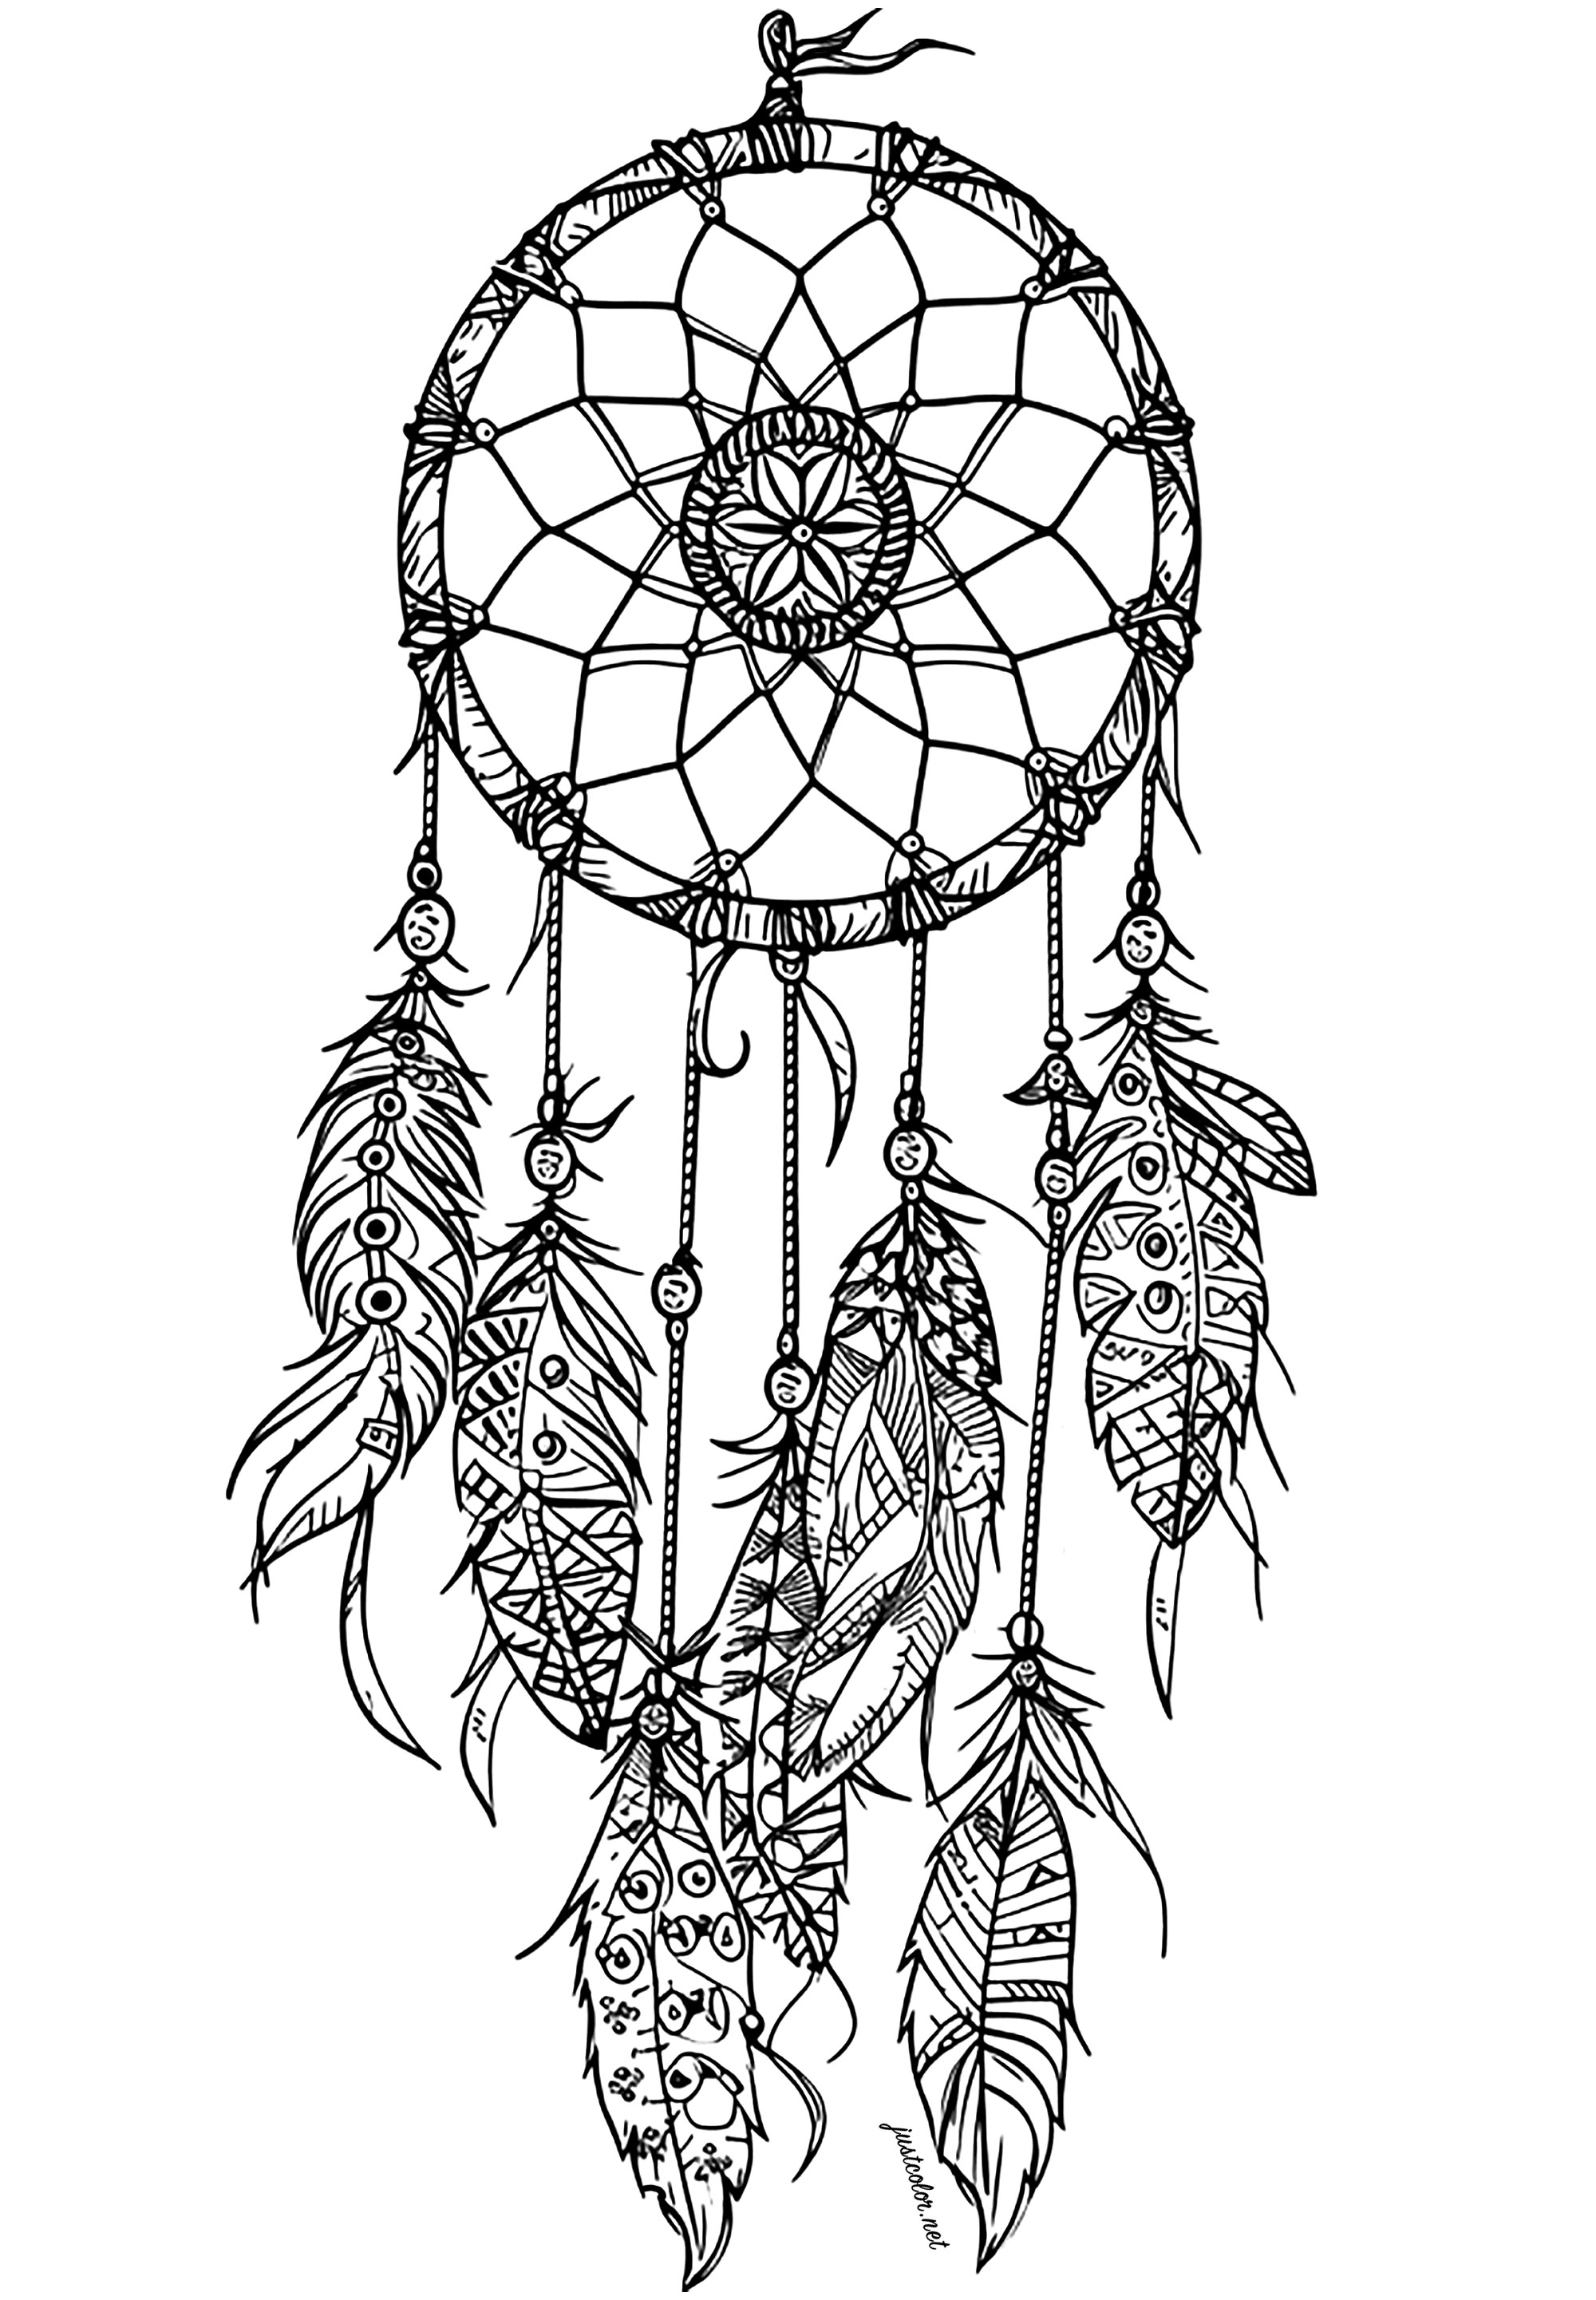 The Seven-Feathered Dreamcatcher